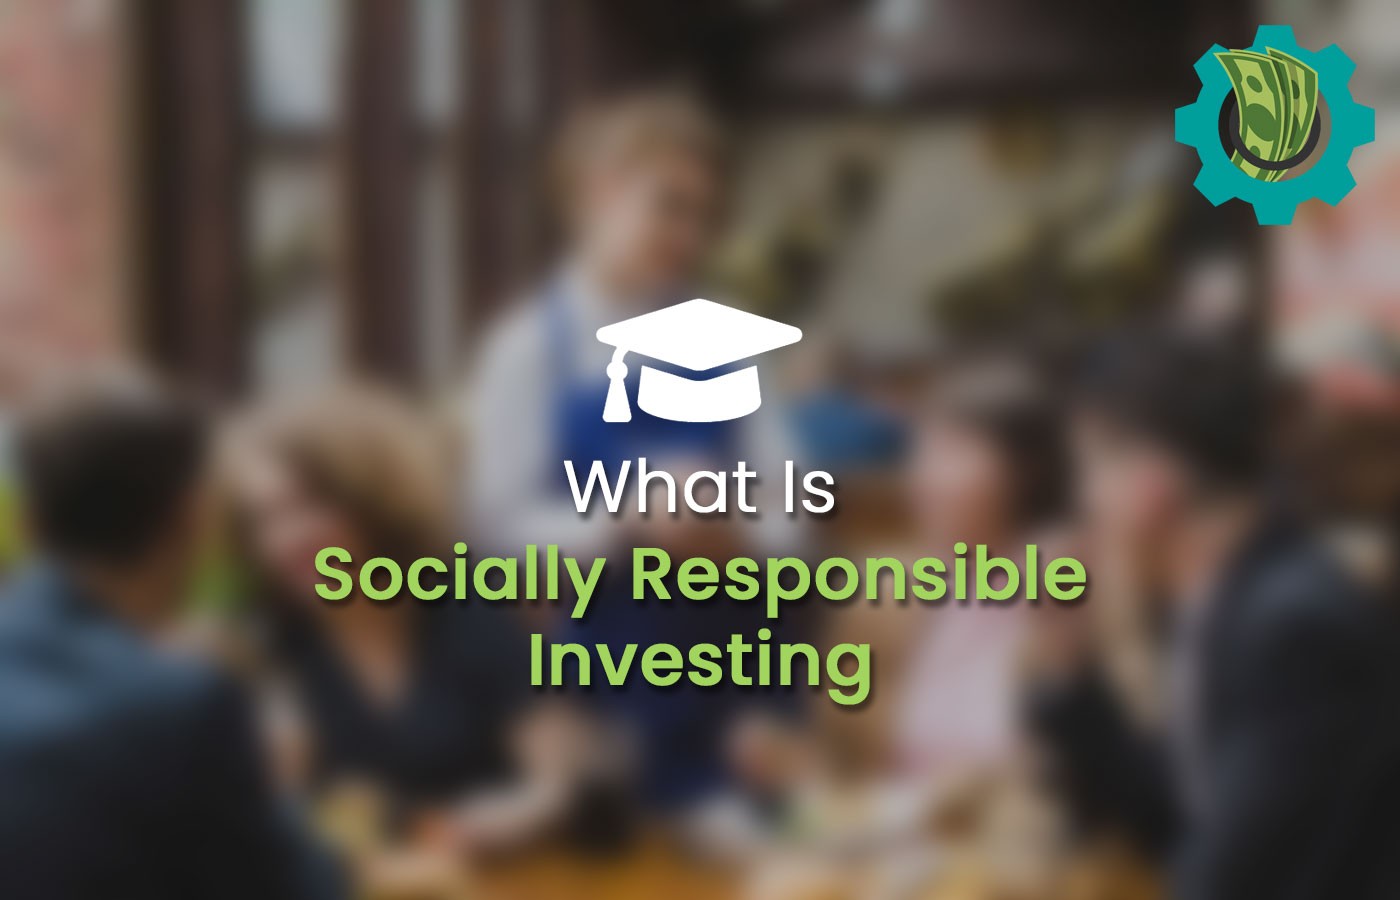 Group of friends discussing socially responsible investing strategies